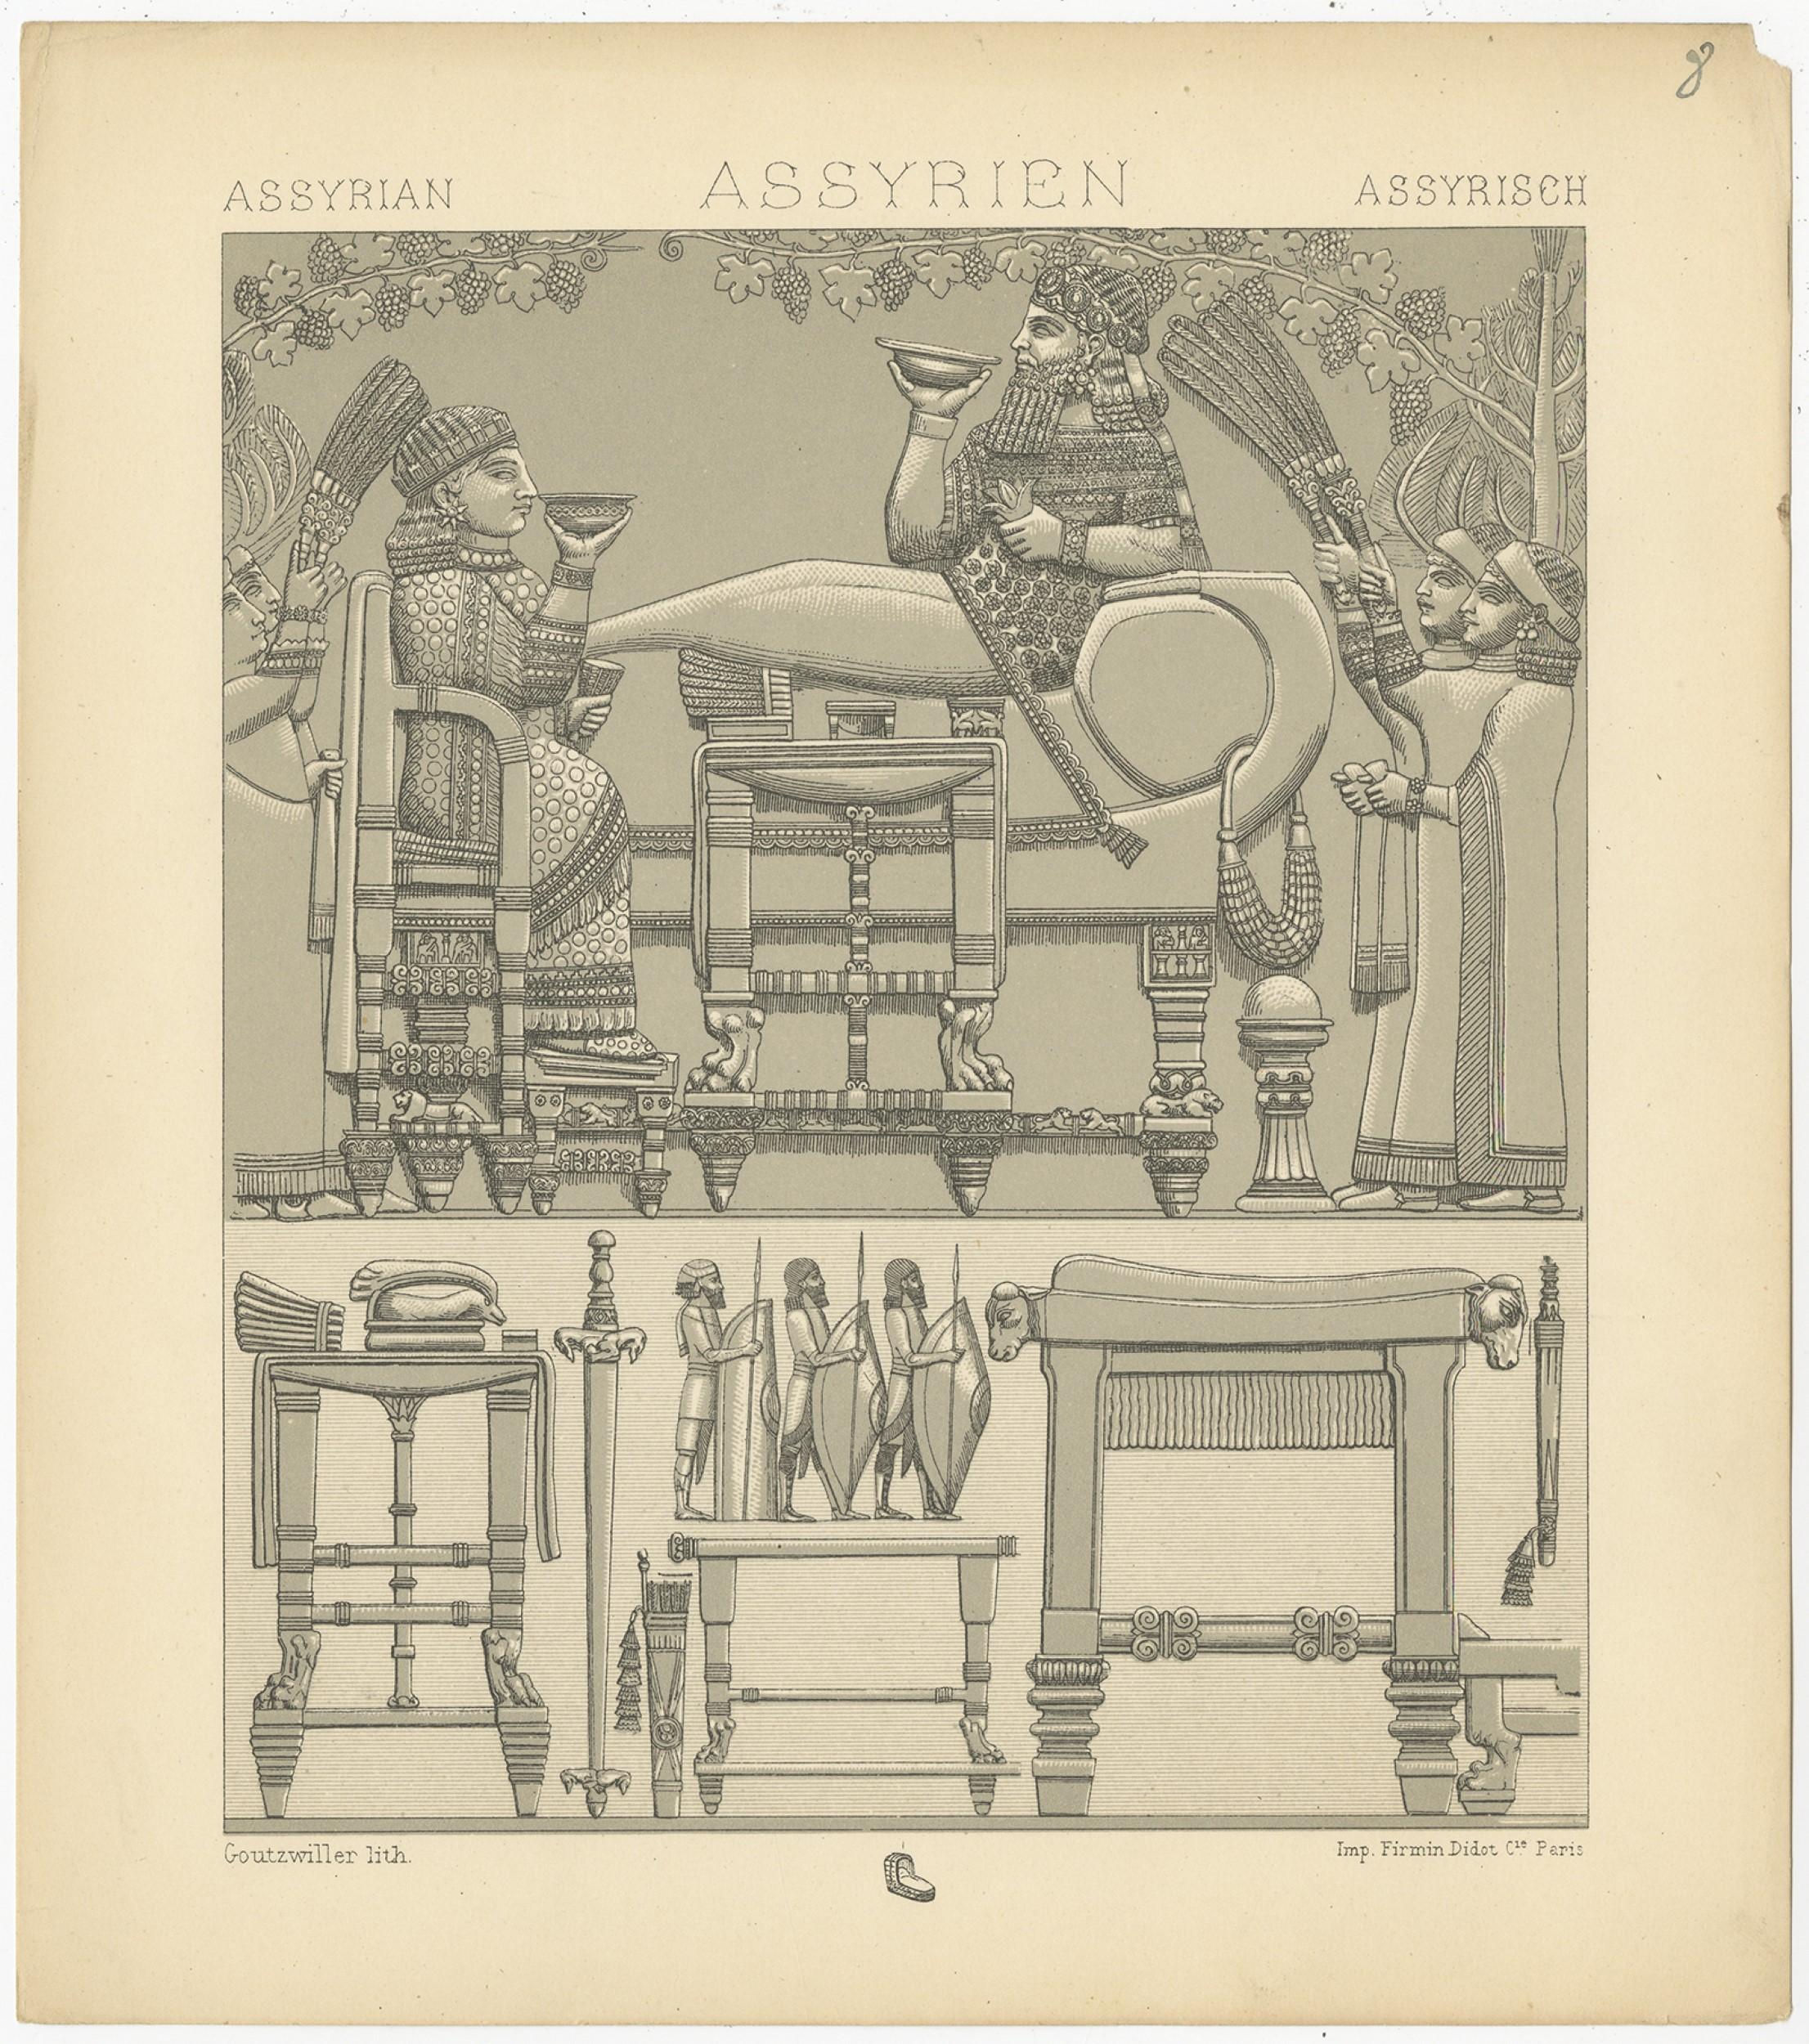 Antique print titled 'Assyrian - Assyrien - Assyrisch'. Chromolithograph of Furniture. This print originates from 'Le Costume Historique' by M.A. Racinet. Published, circa 1880.

    